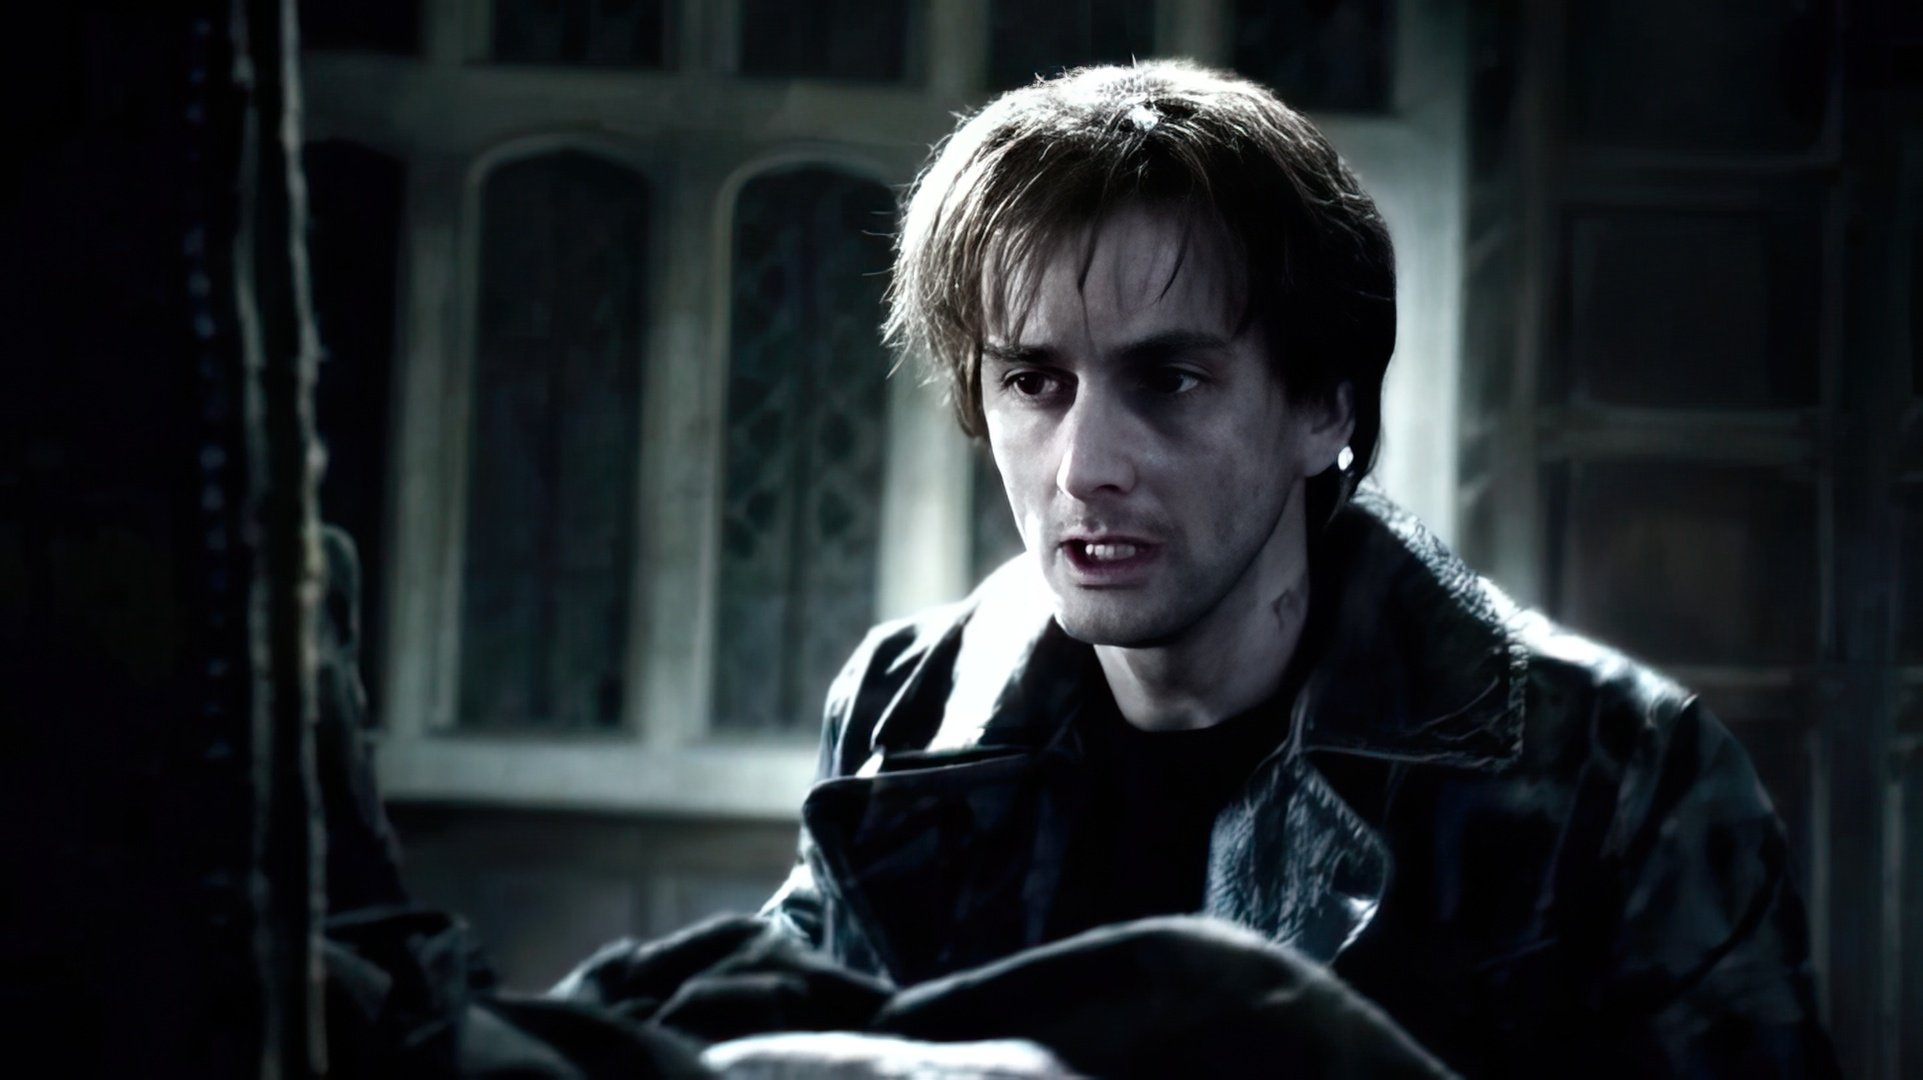 Harry Potter: David Tennant played Barty Crouch Jr.